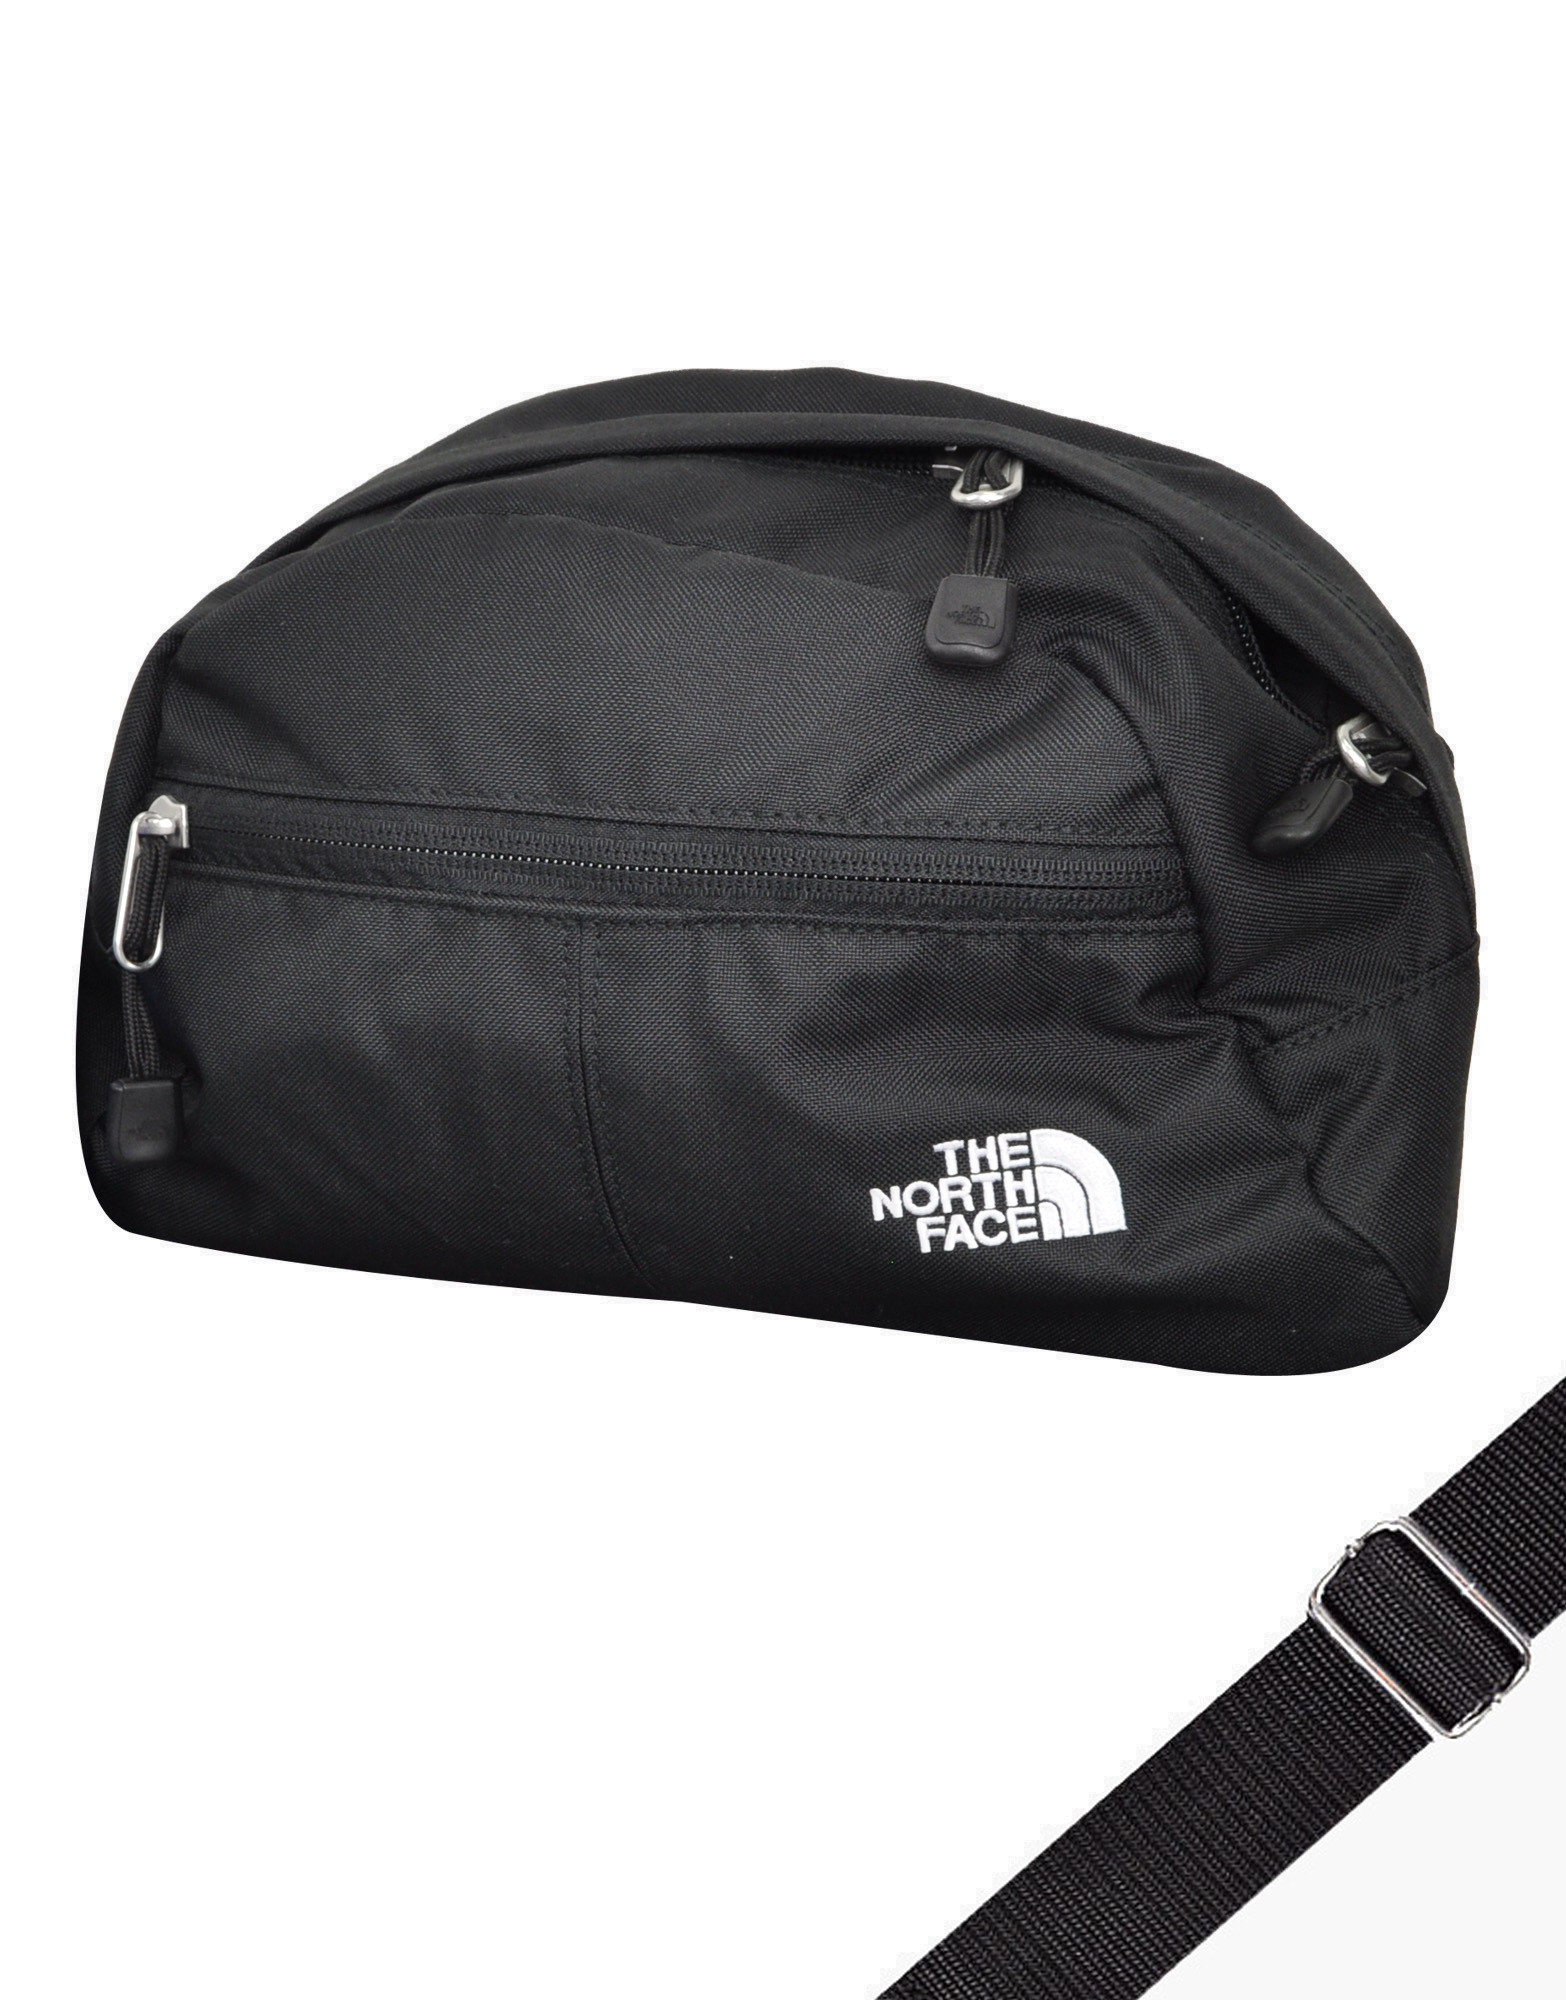 Roo II Waist Pack by THE NORTH FACE (colour: black)